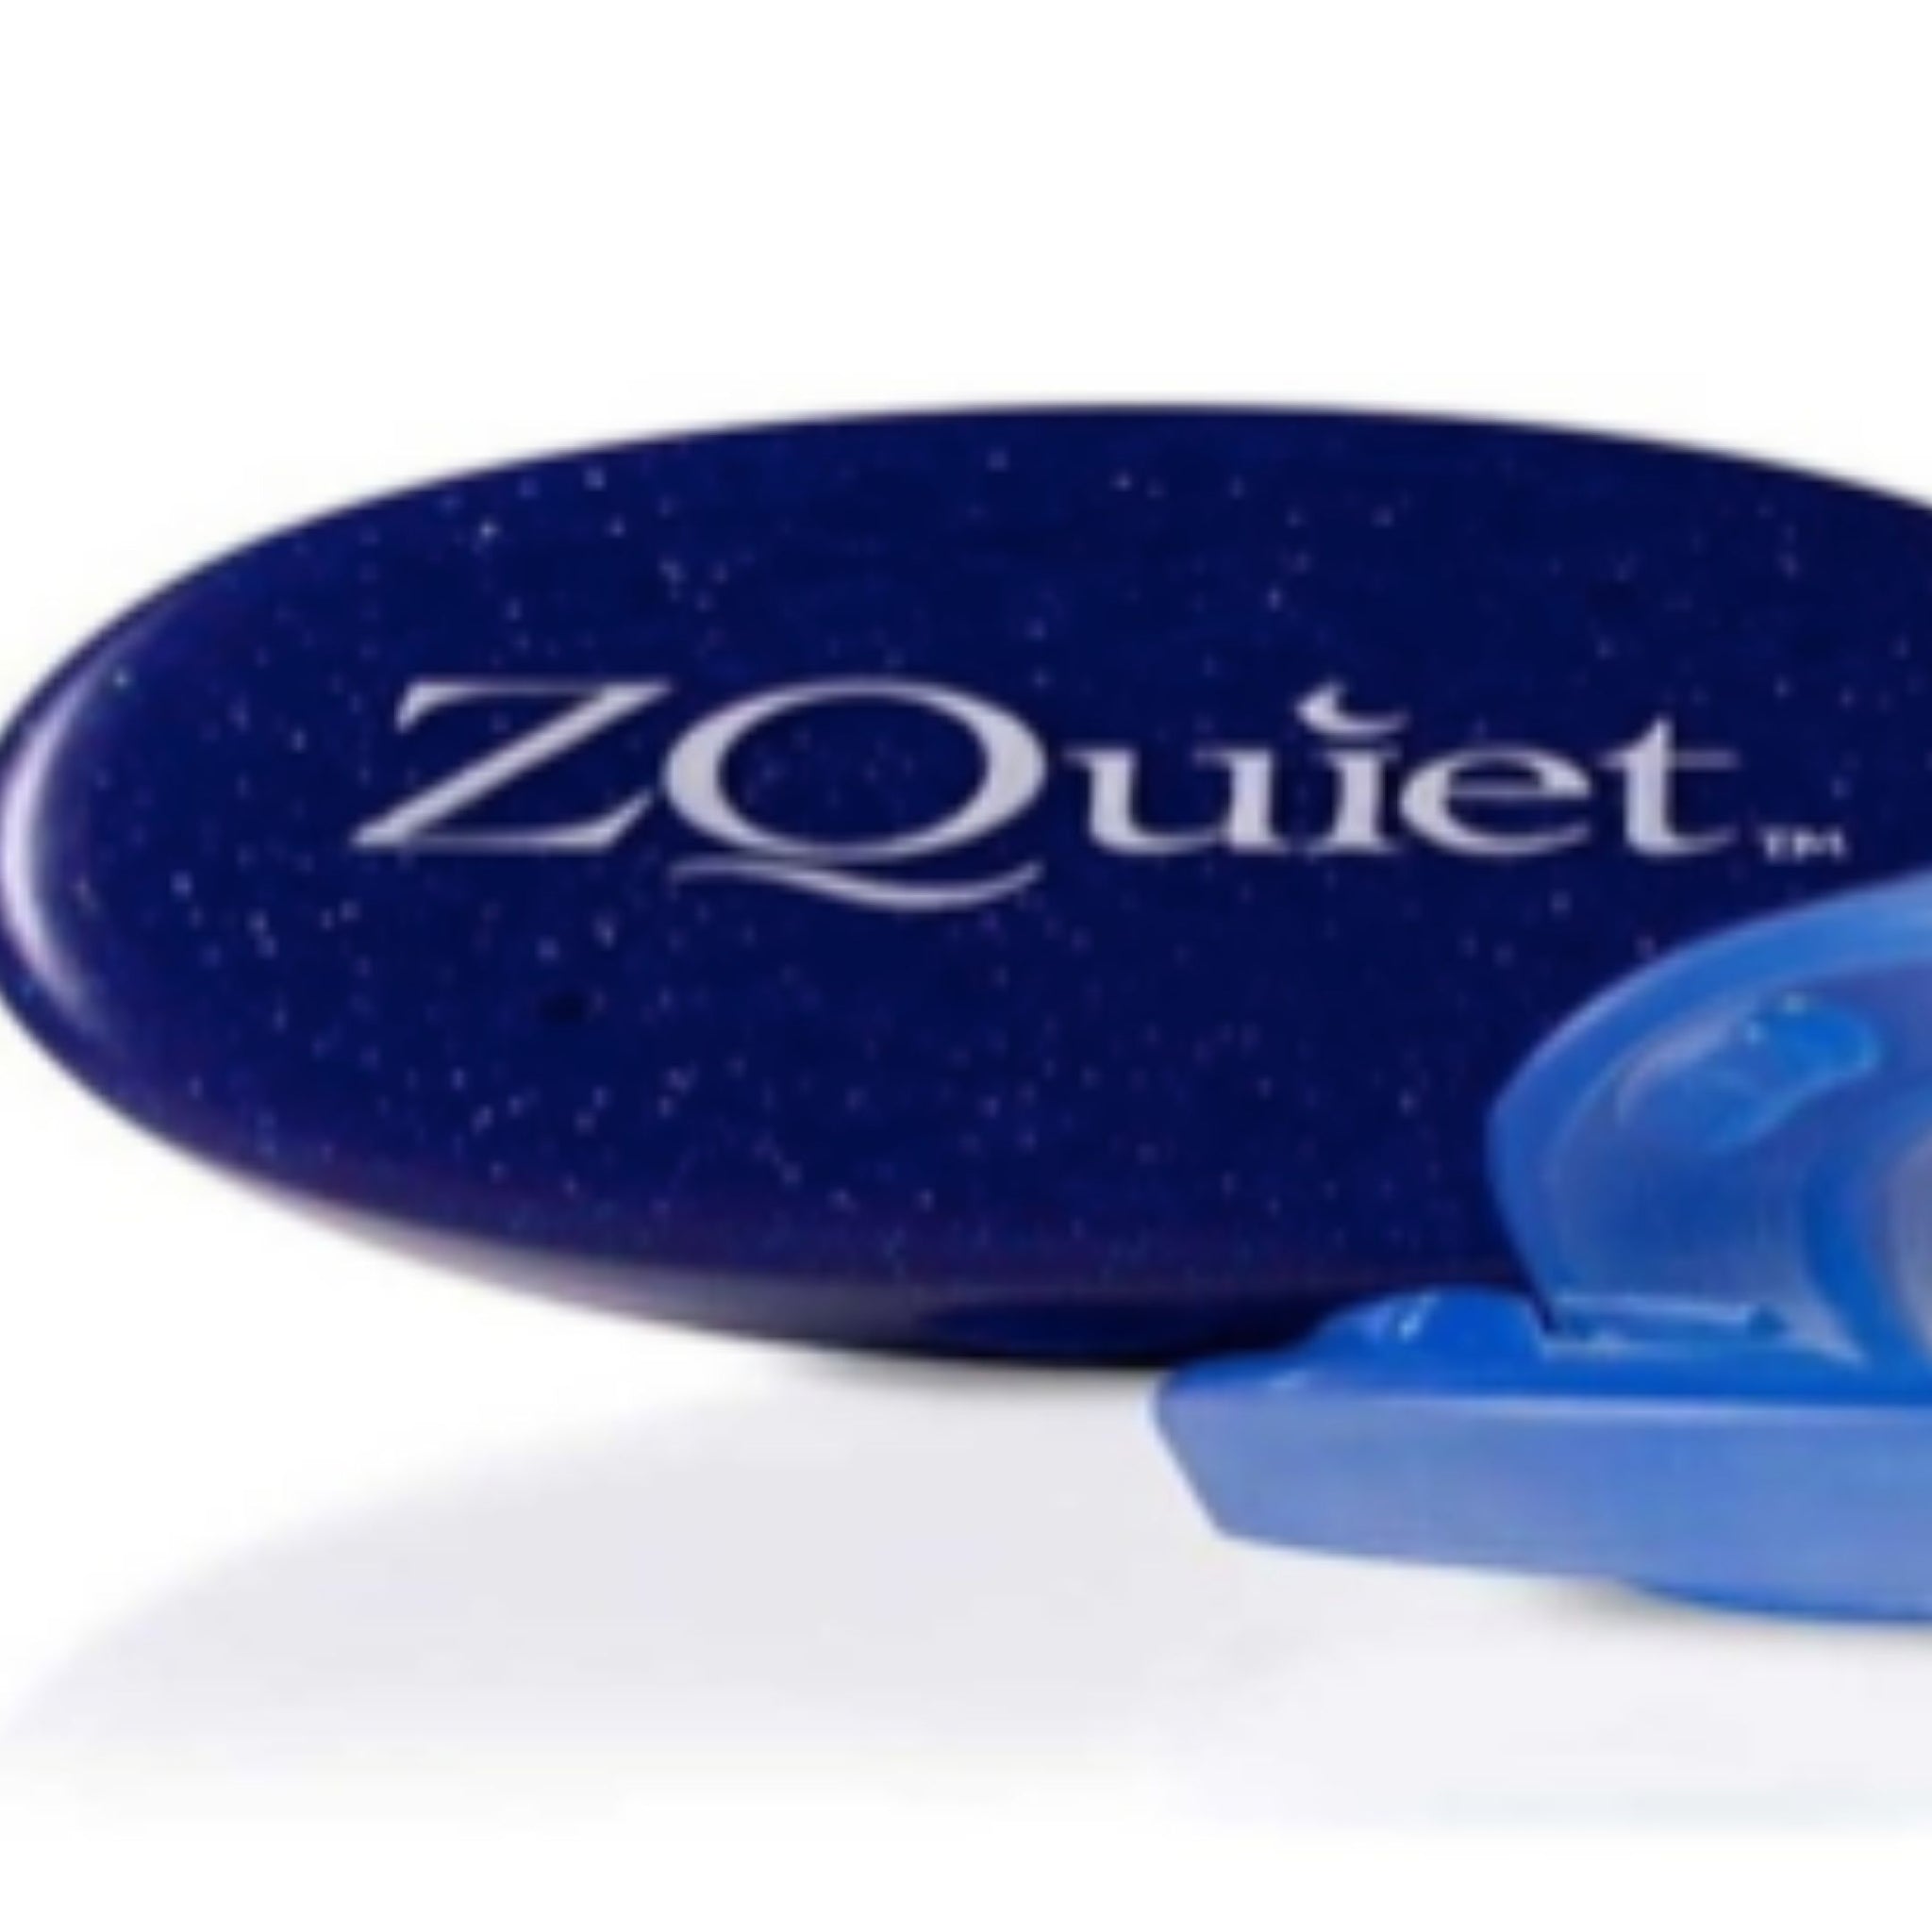 Does anti-snoring mouthpiece actually work? Here is the answer